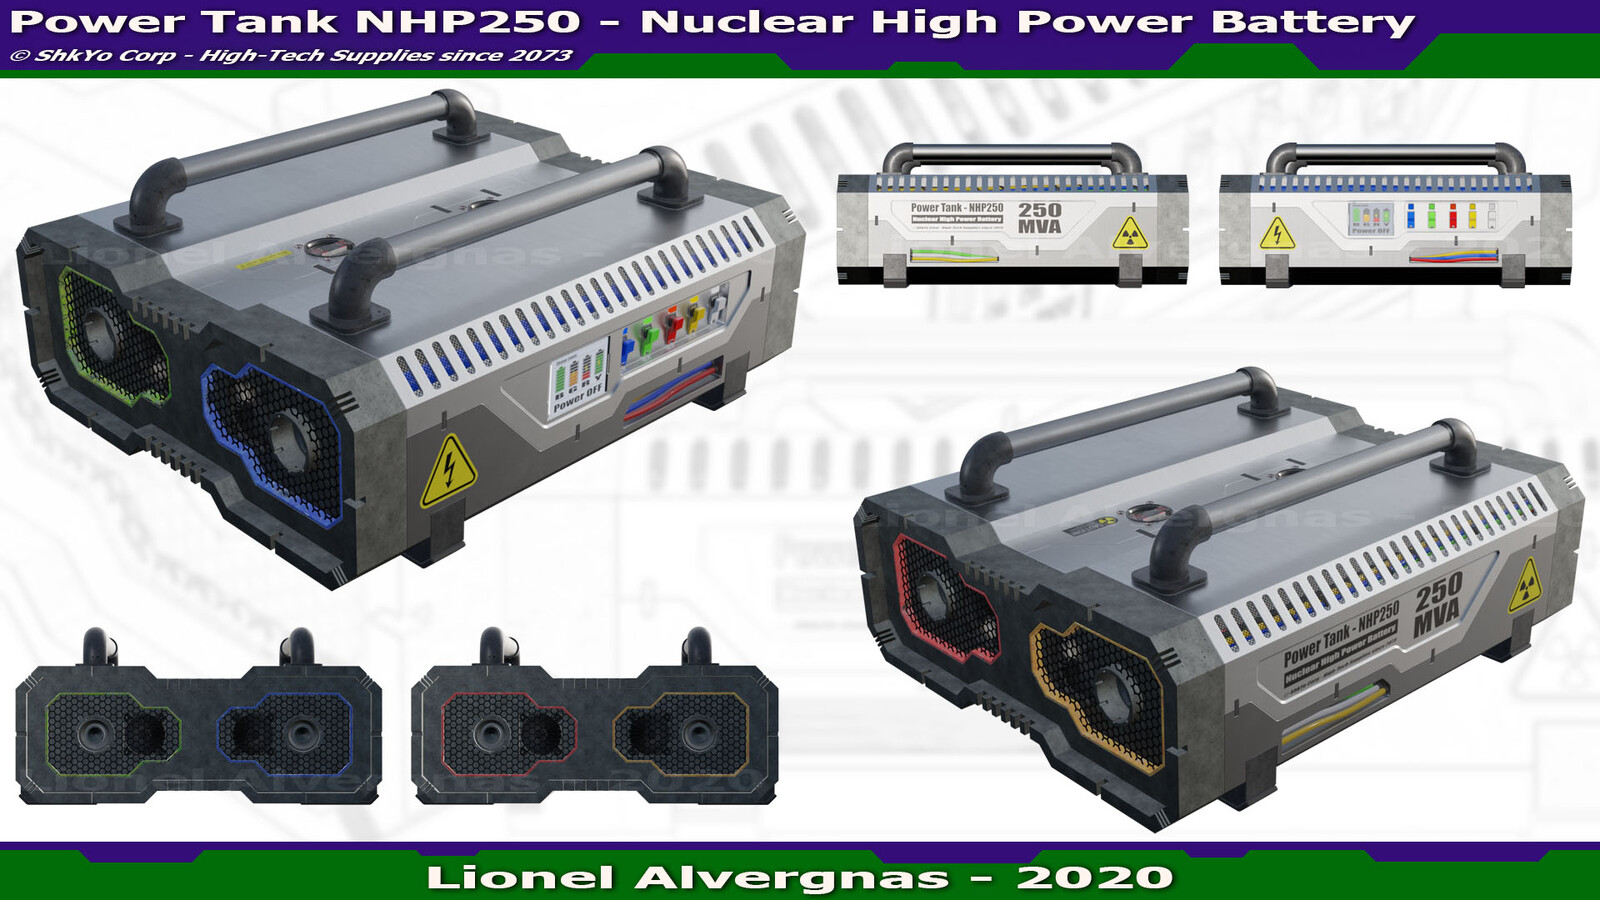 The NHP250 : a nuclear electric power battery...